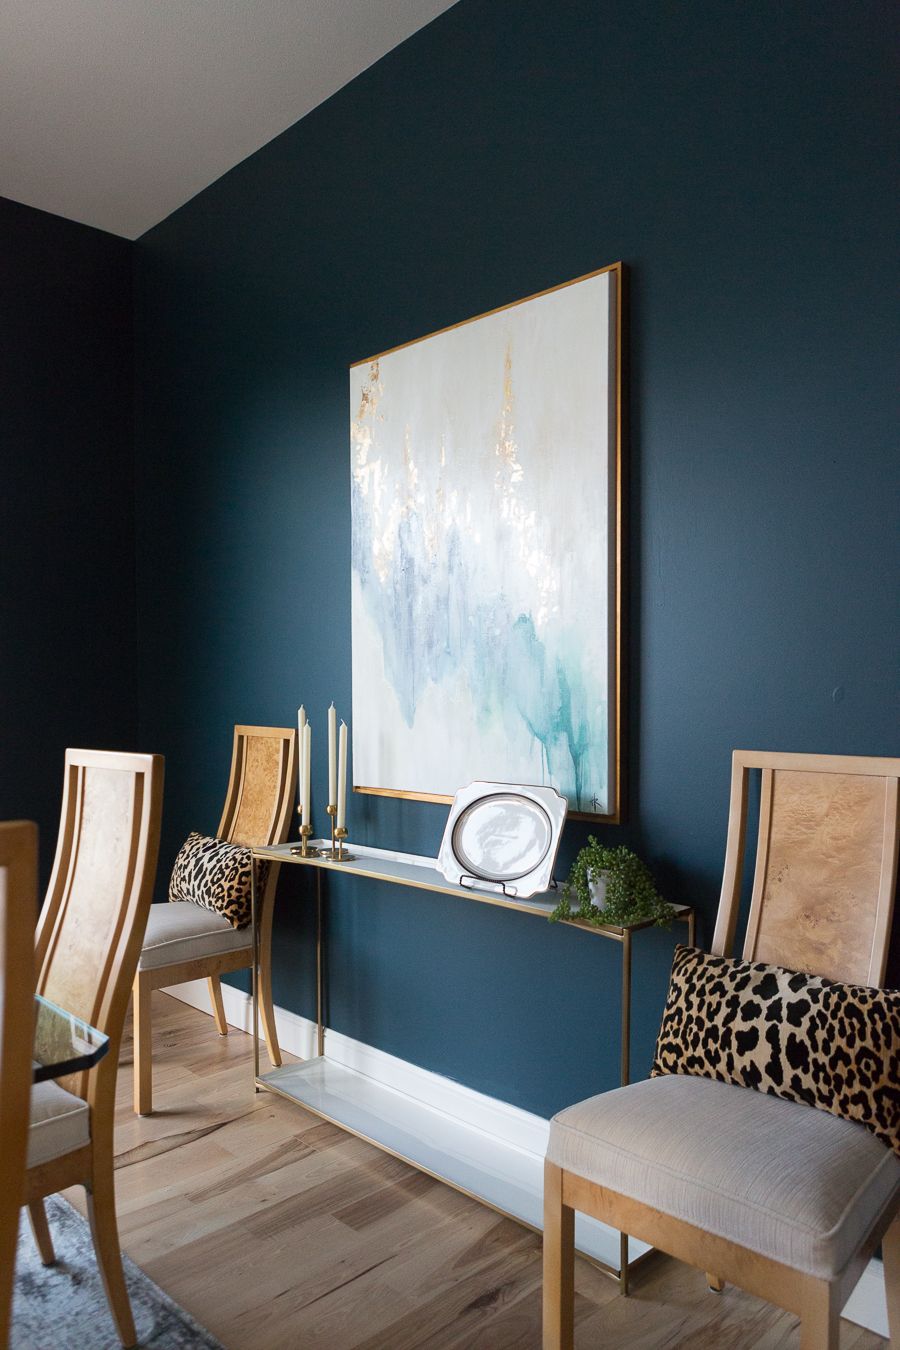 Top 3 Blue Green Paint Colors for Dark and Dramatic Walls